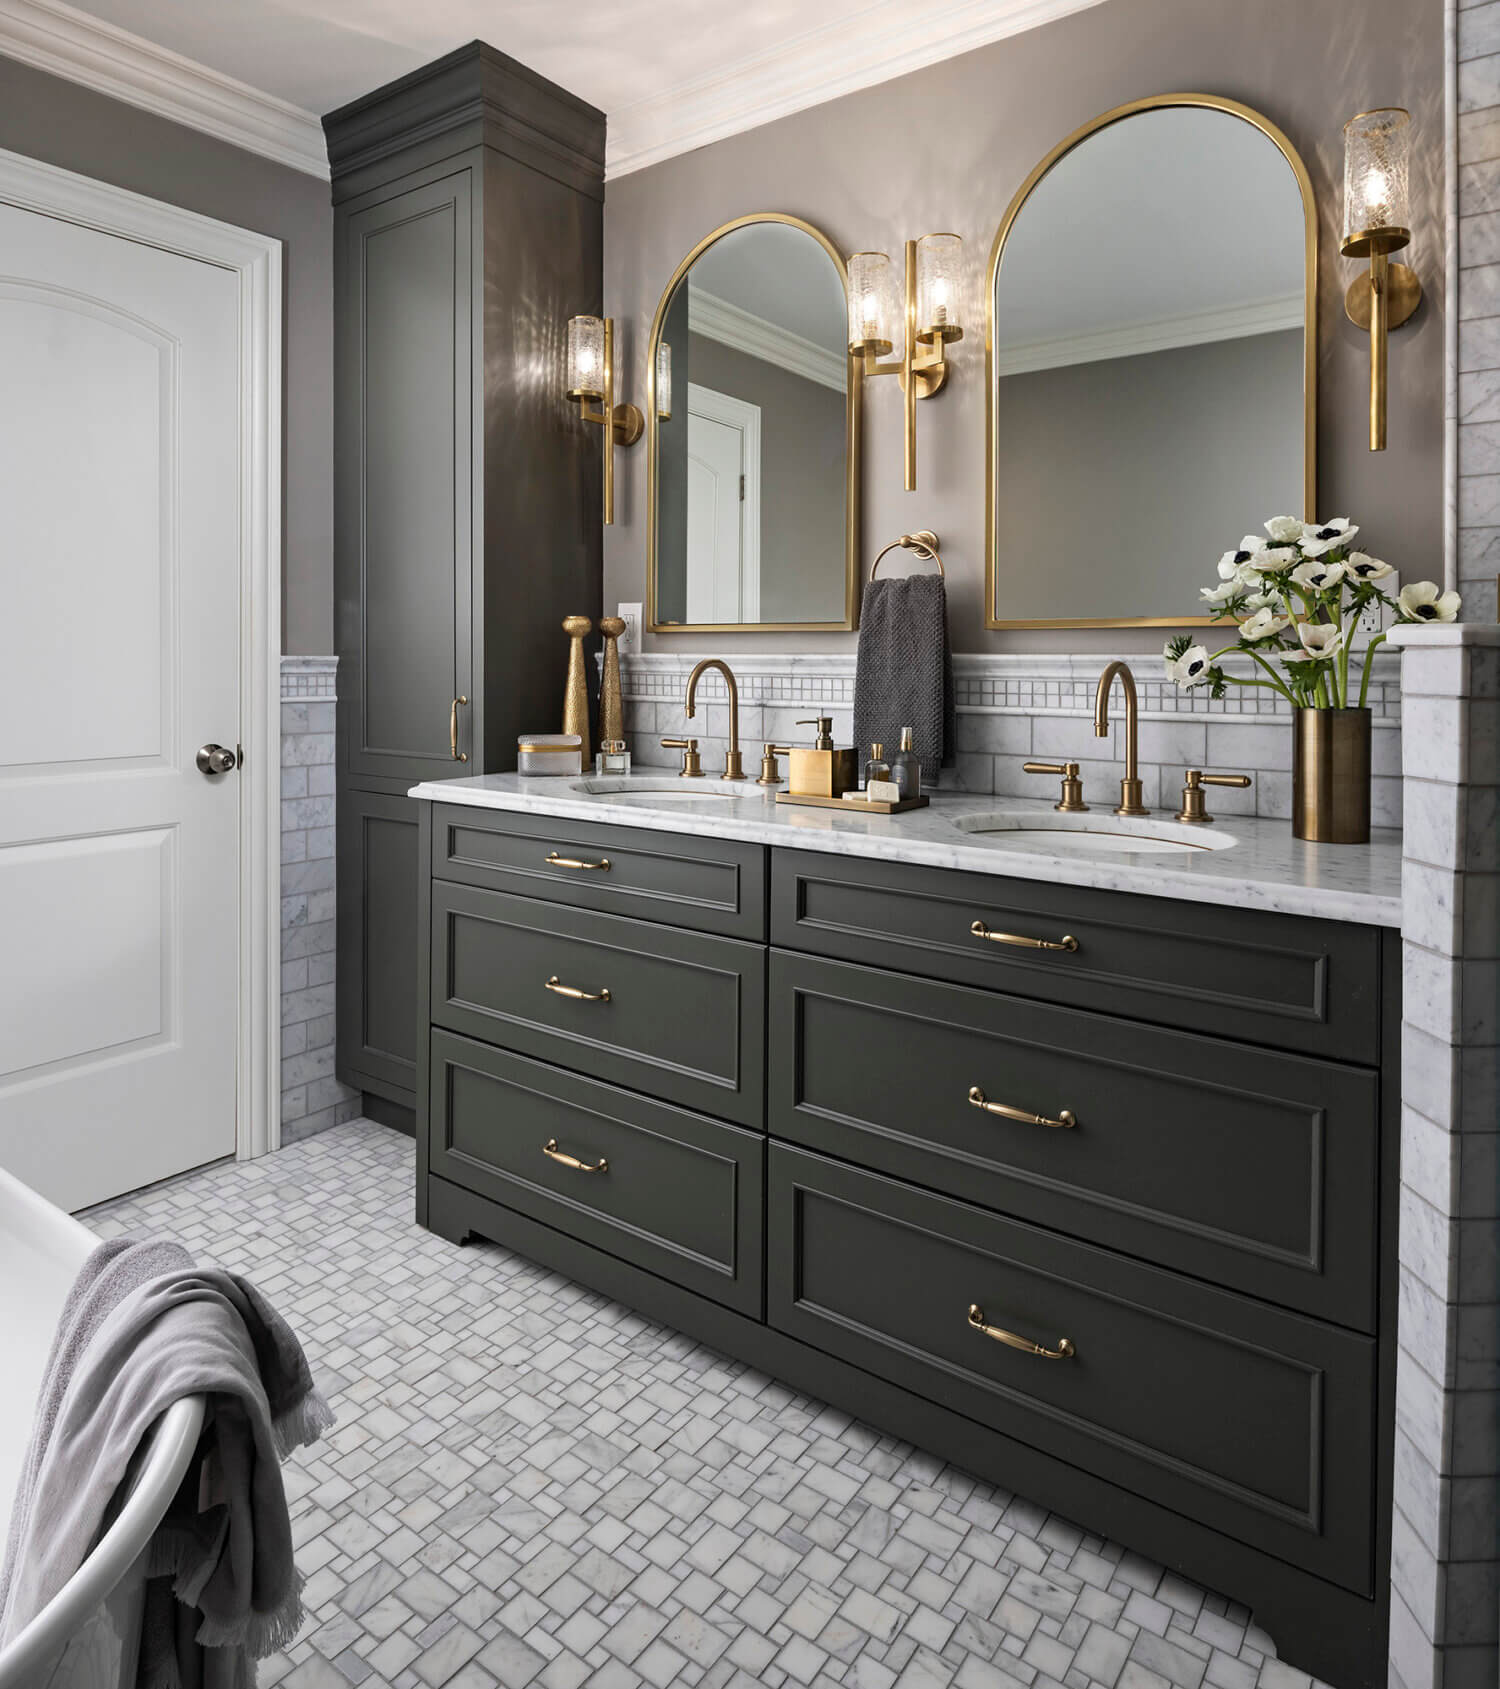 A trendy bathroom remodel with a popular dark green painted finish for the bathroom vanity and tall linen cabinet.